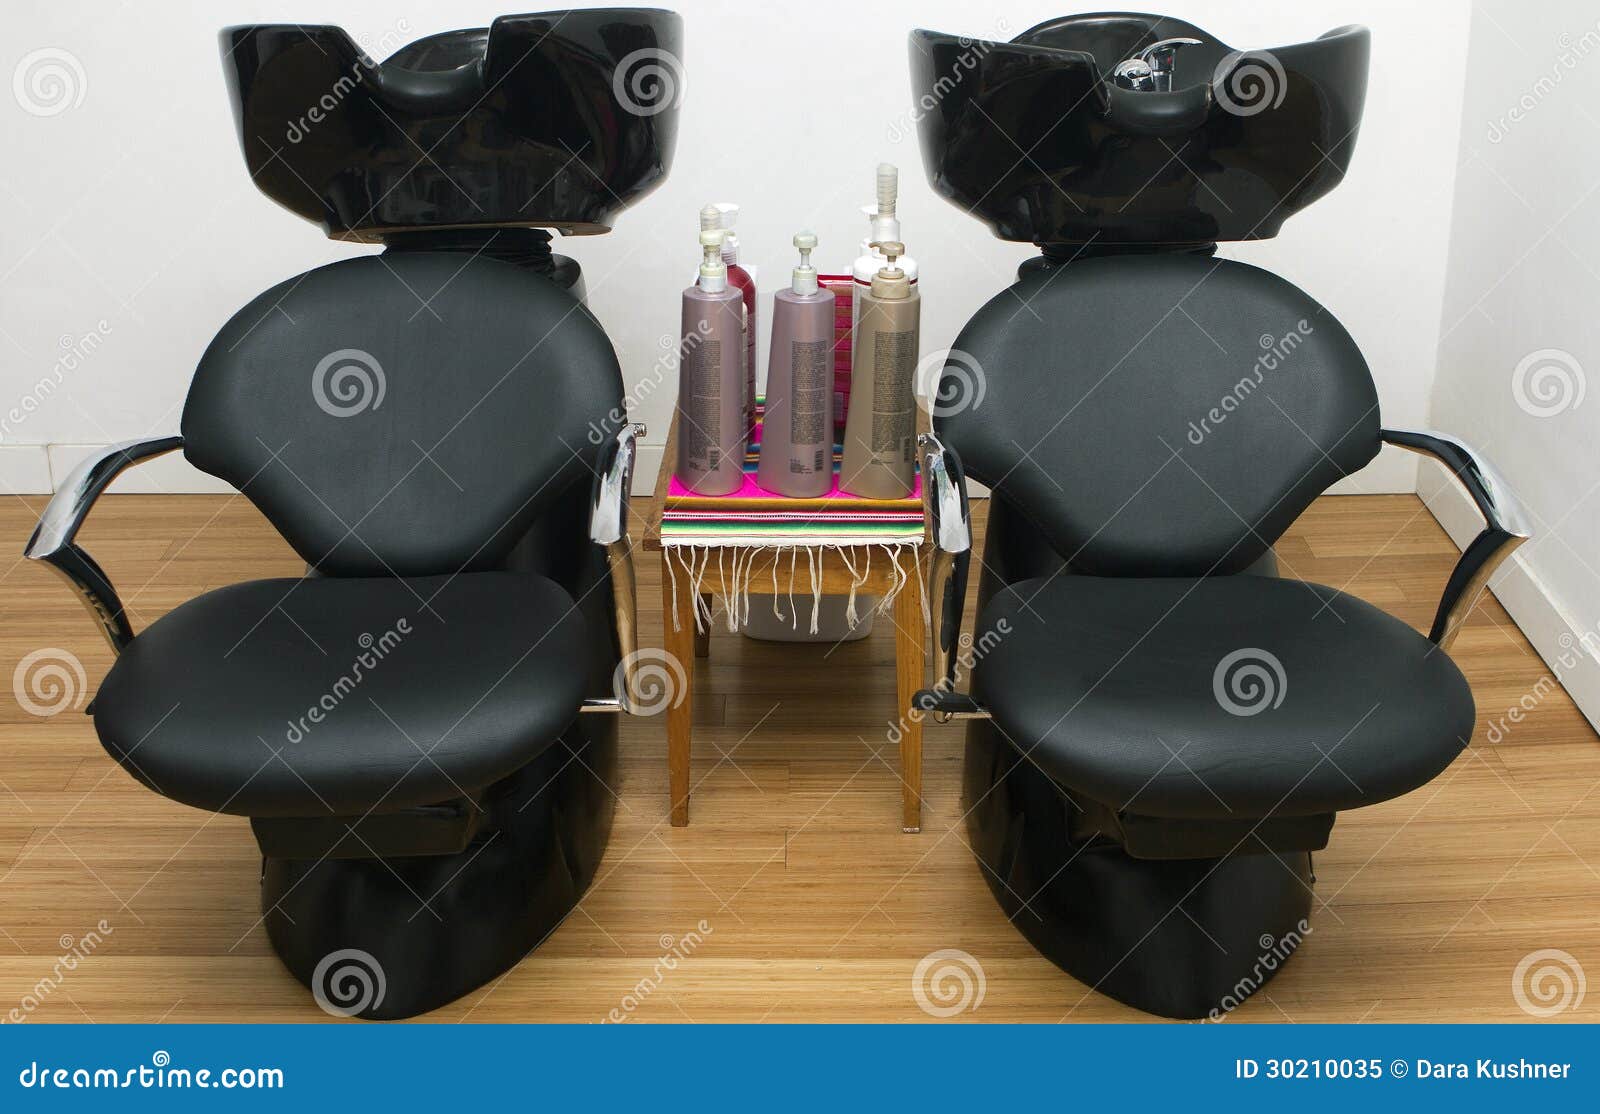 Hair Salon Sinks And Chairs Stock Image Image Of Beauty Floor